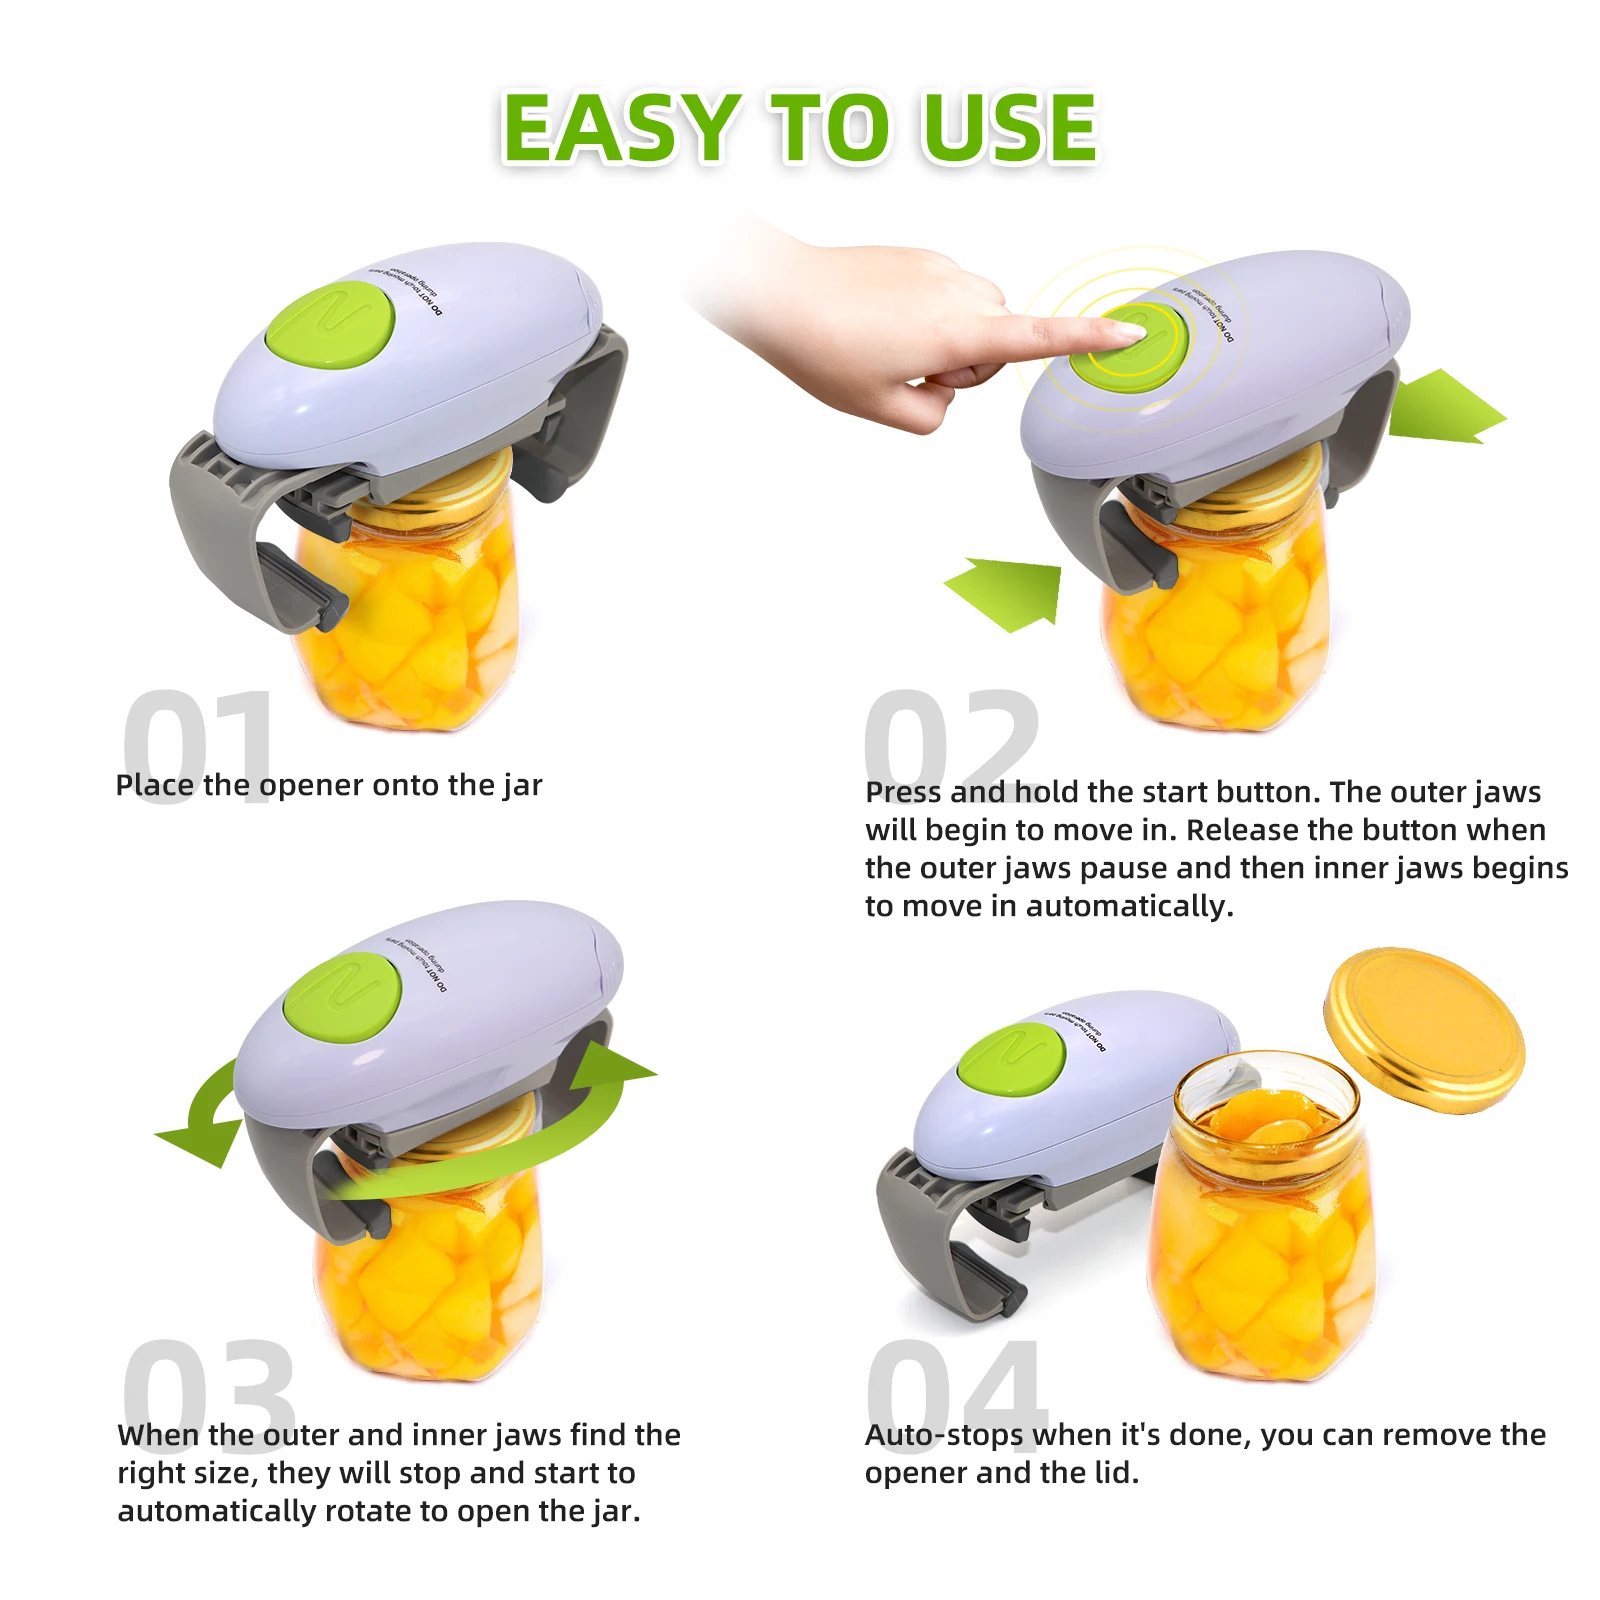 https://ae01.alicdn.com/kf/H251a5e5ffca34dc887bb807dc11ffe48o/Electric-Bottle-Opener-Automatic-Jar-Can-Opener-Accessories-Gadgets-Glass-Tools-For-Home-Kitchen-Restaurant-Use.jpg